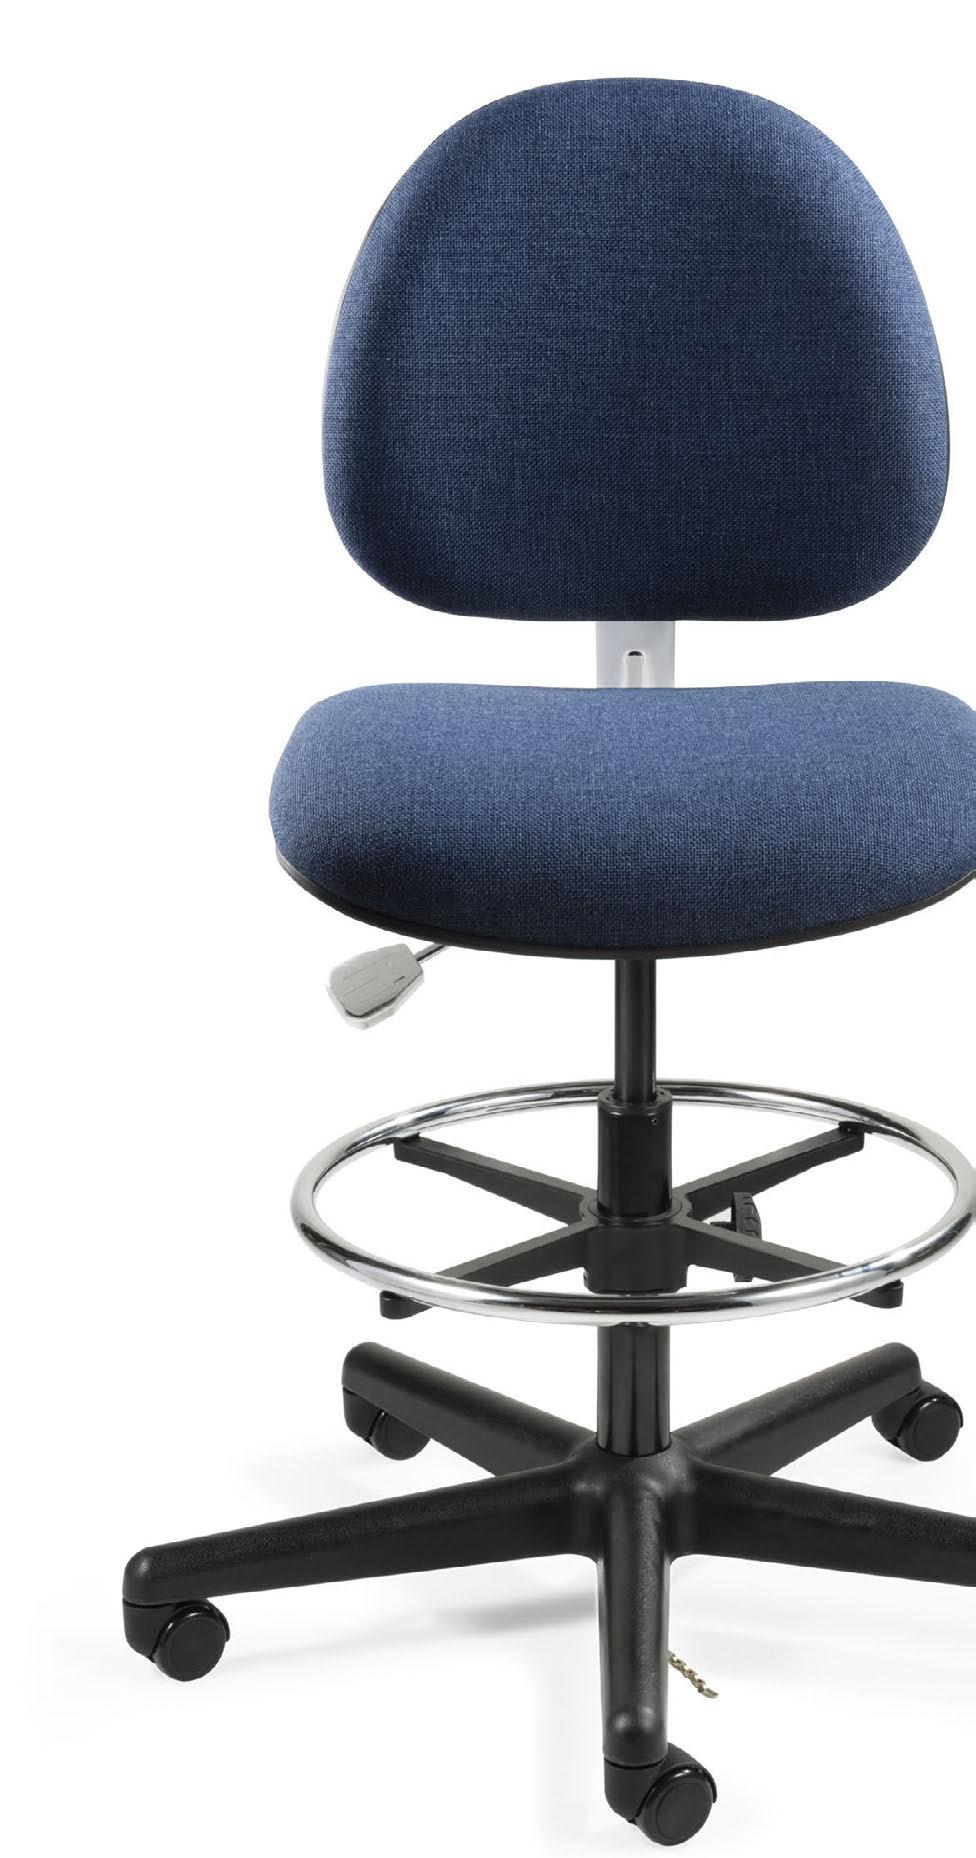 AVAILABLE COLOR DIMENSIONS SEAT 18 W x 18 D 2 ¾ Thick BACK 16 W x 15 H 2 Thick Height Range DESK MID NAVY Base Style Nylon Nylon Casters or Glides V830SHC Seat Height Adjustment